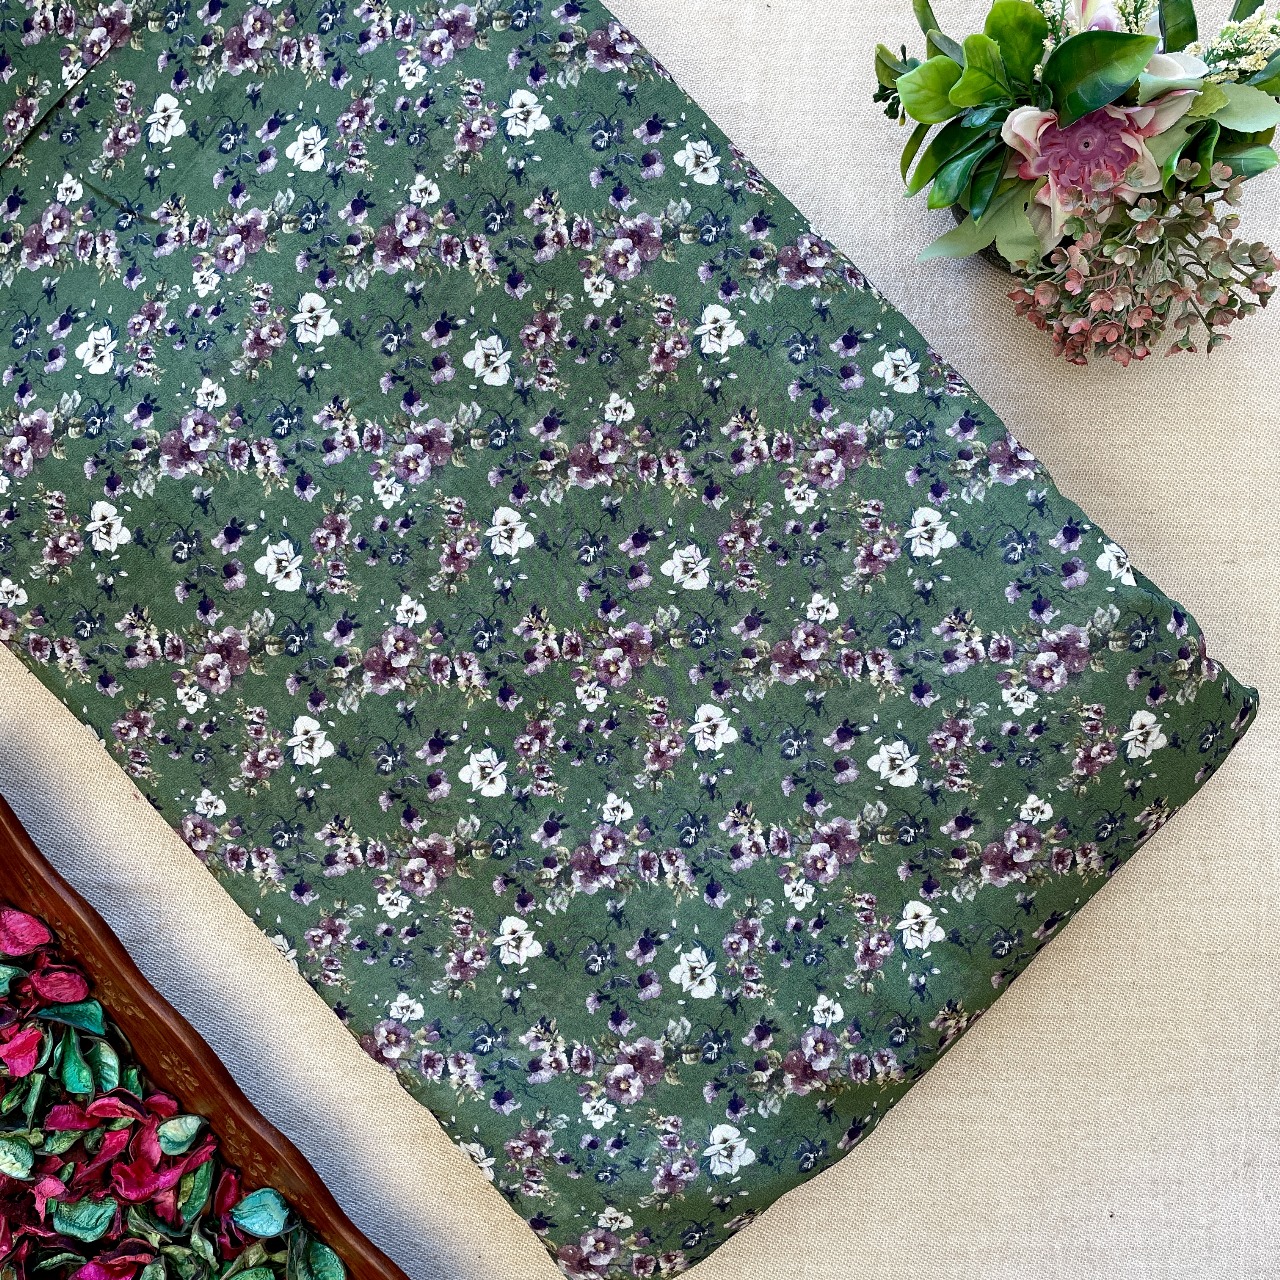 Pure Georgette Printed Fabric - Green/Purple - Floral